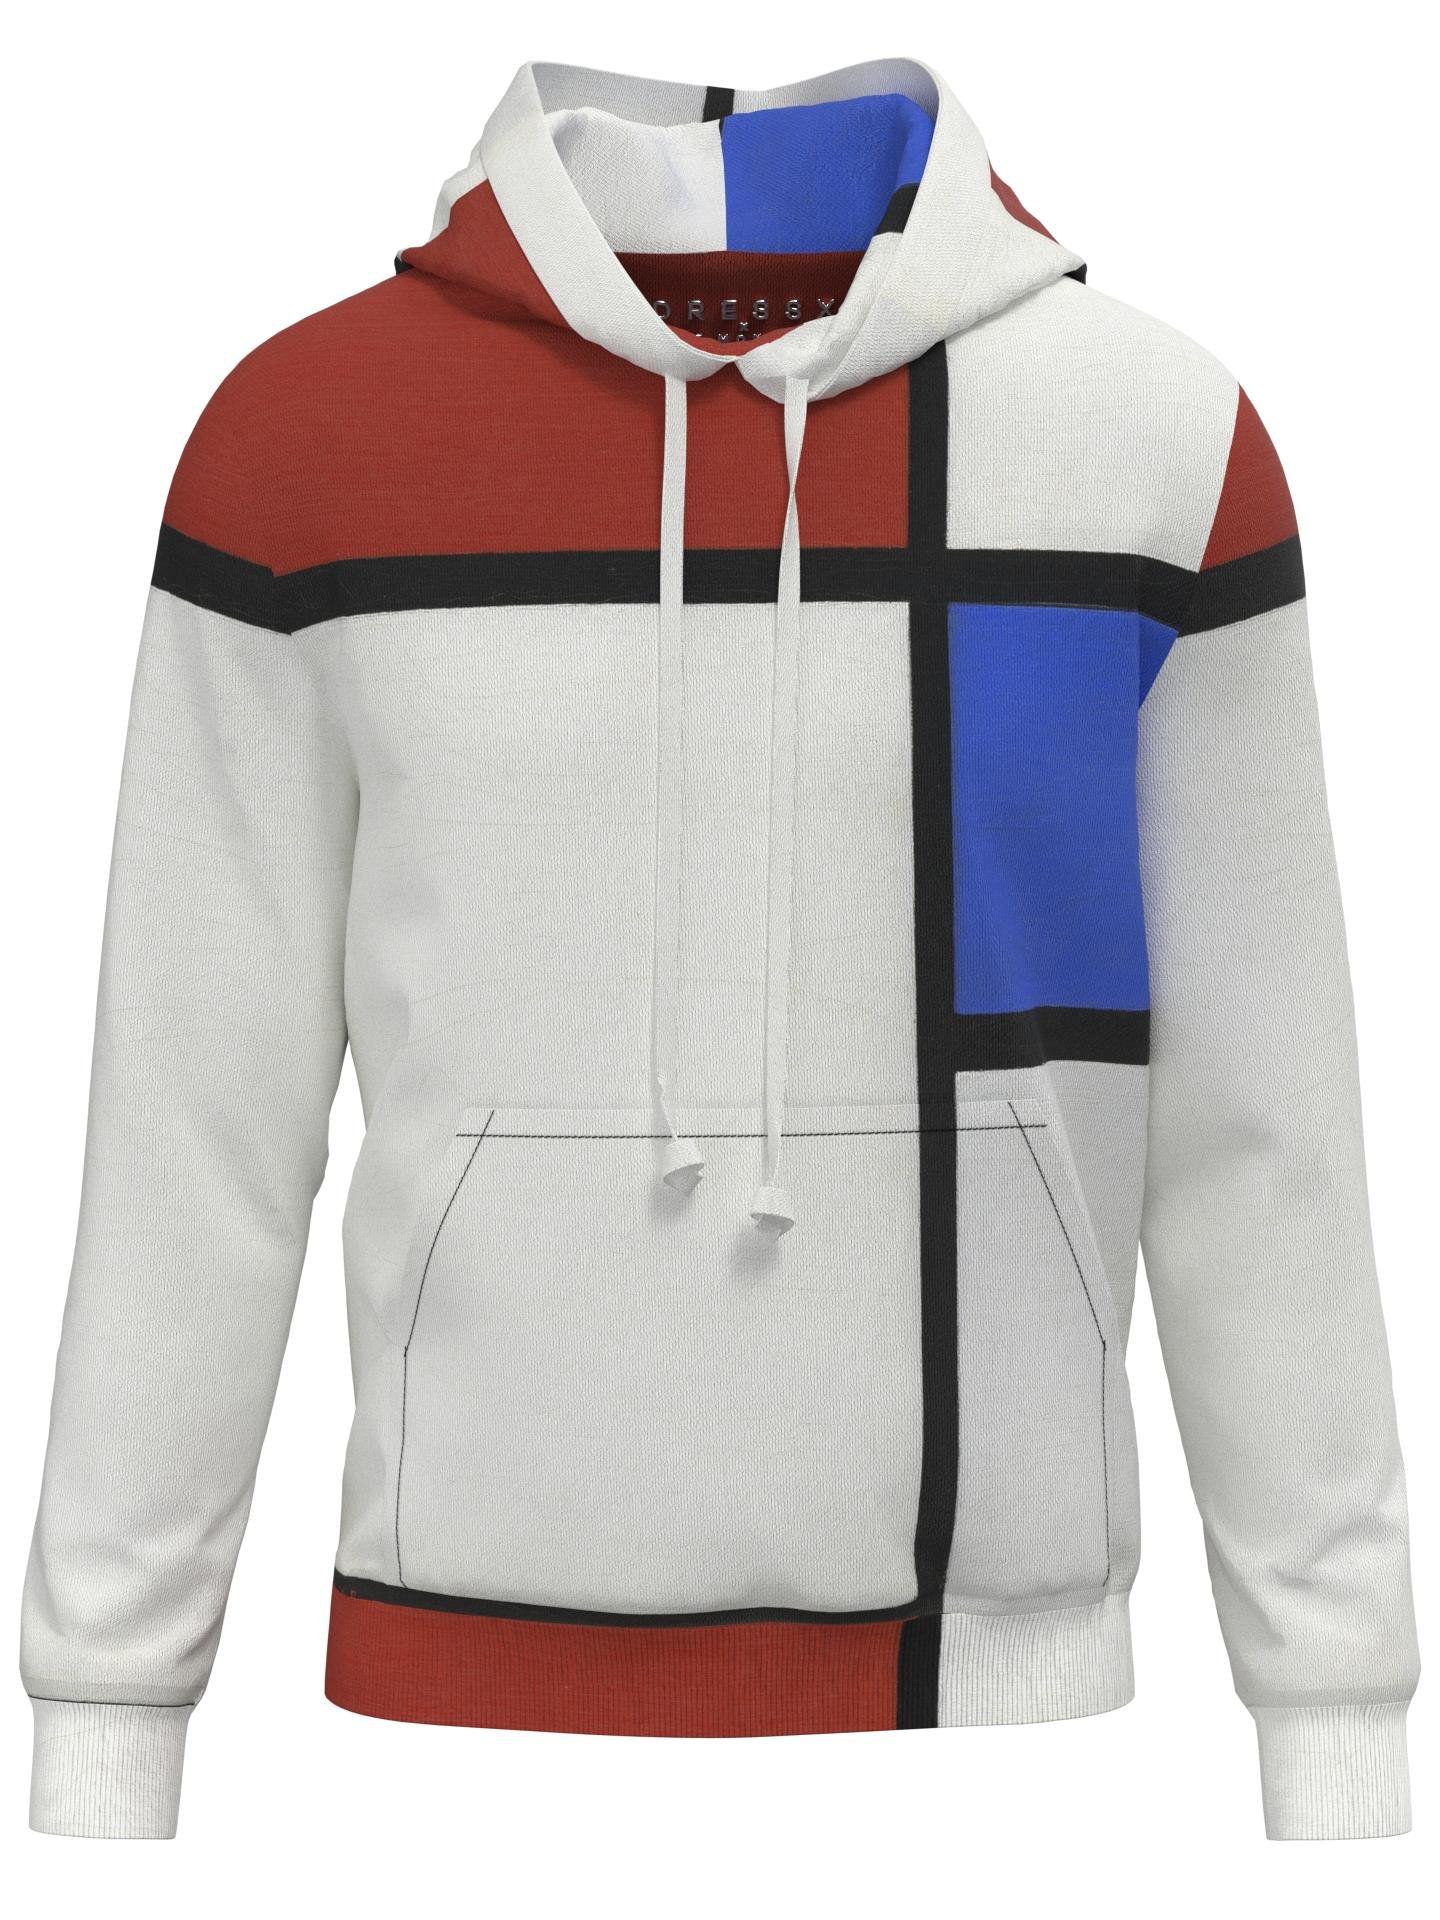 Hoodie-Composition No. II with Red and Blue by DRESSX